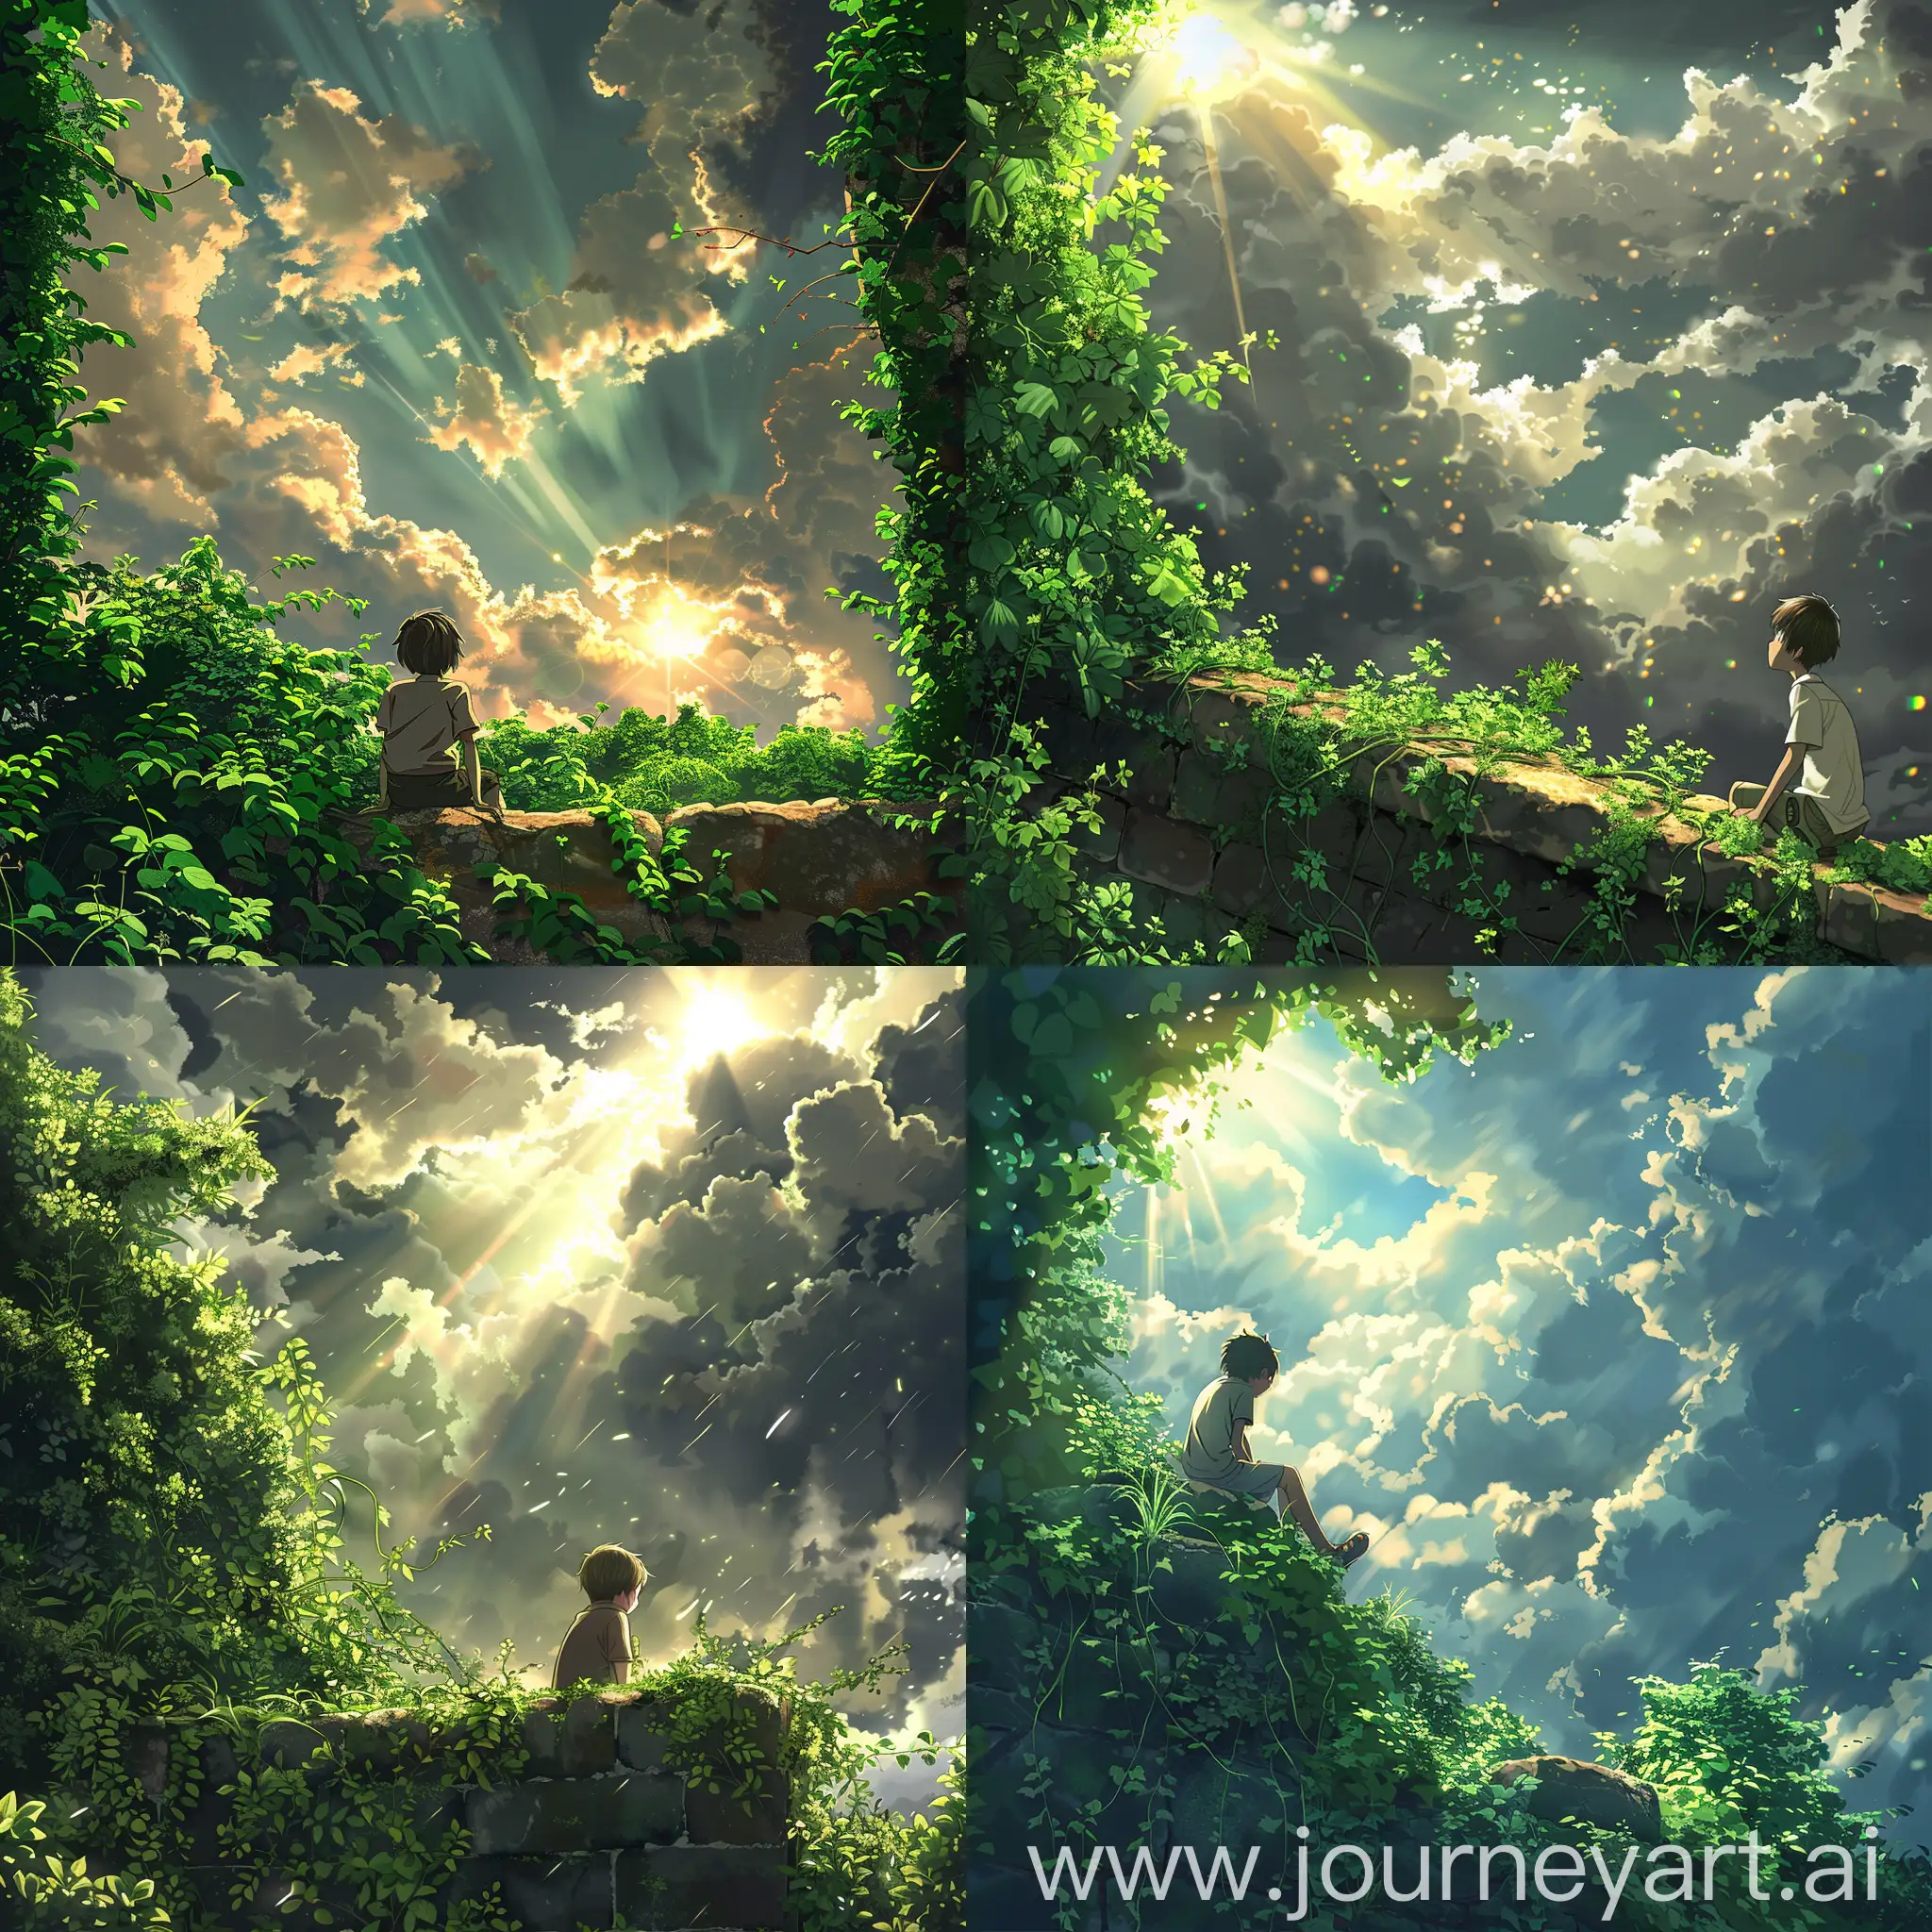 Anime scene highly detailed greenery a boy looking at the cloudy sky and sunlight sitting over the stone make it beautiful digital illustration anime style 4k resolution highly detailed